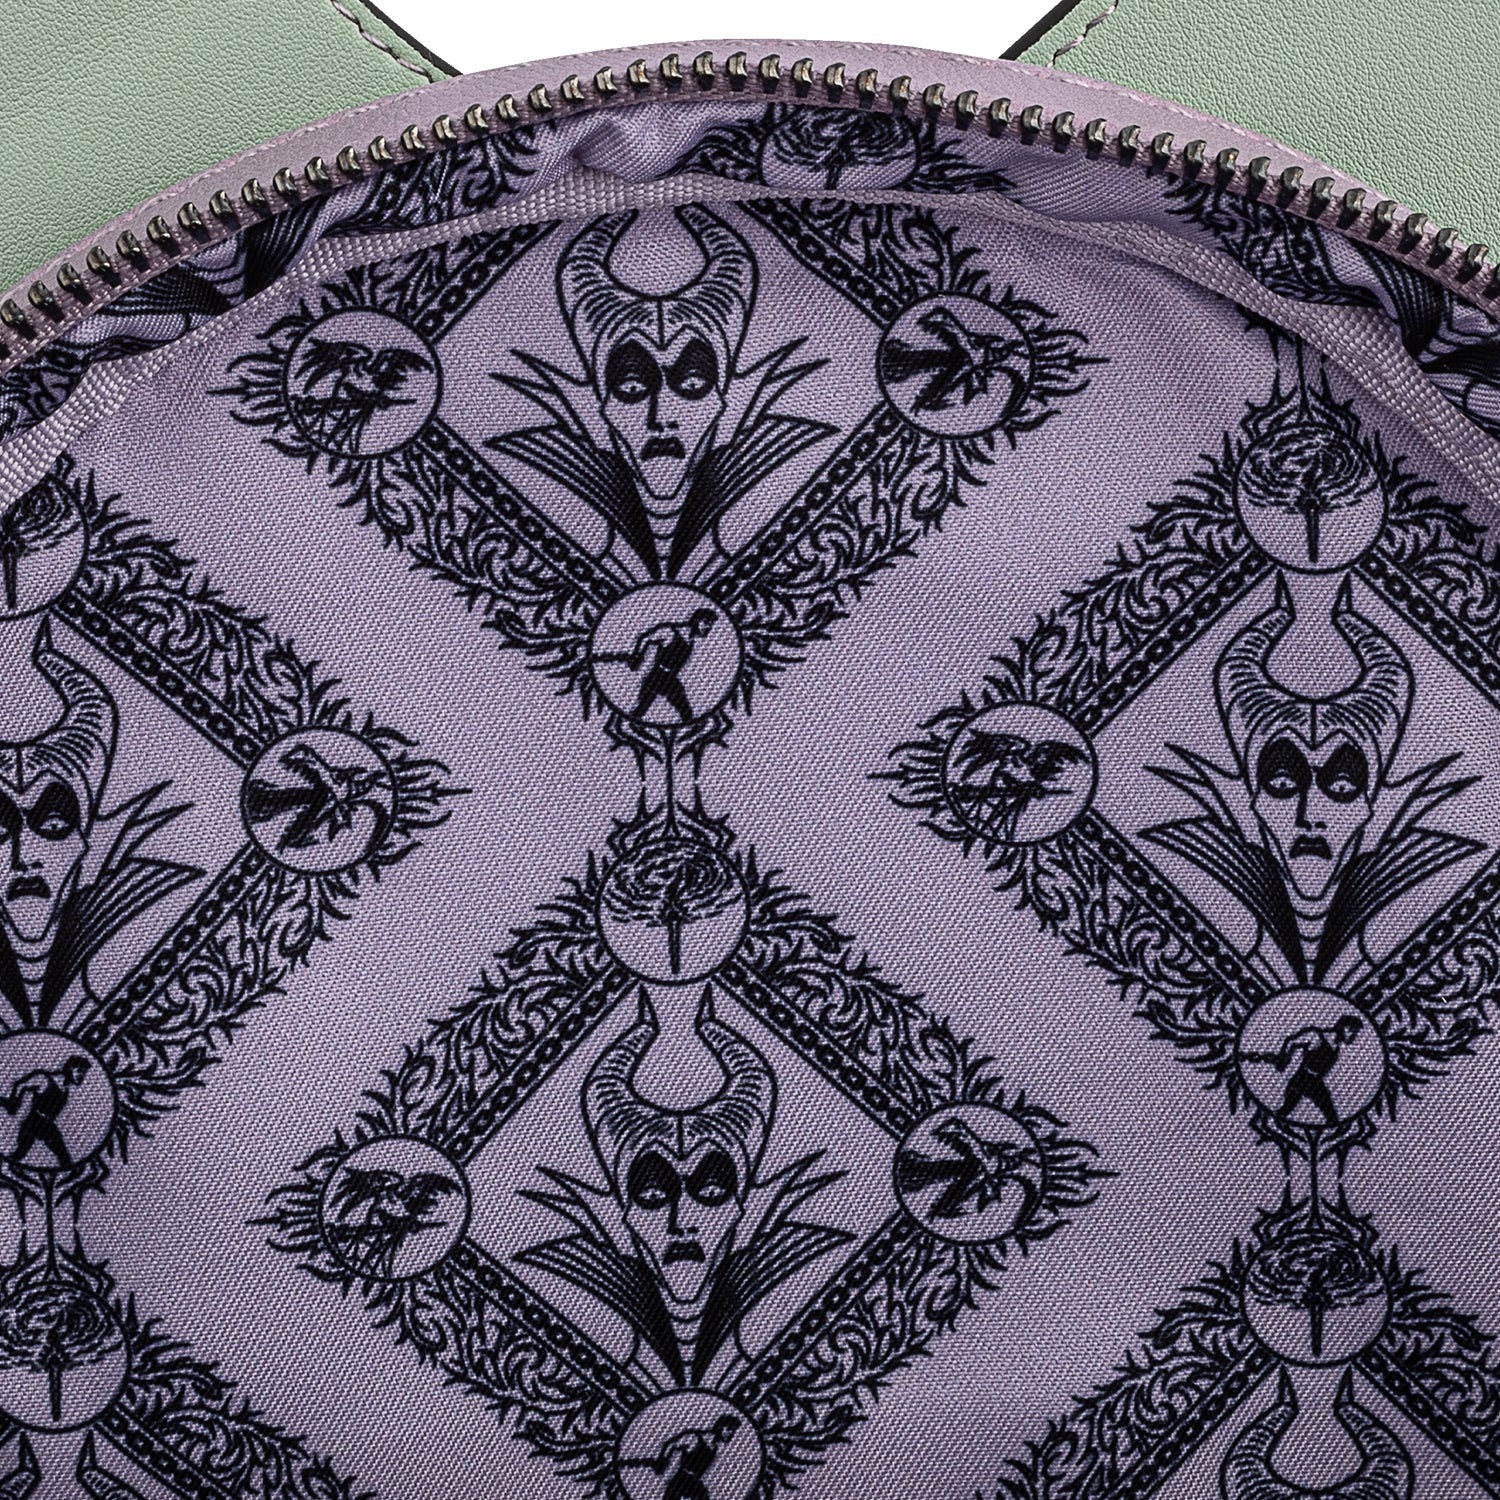 A VERY Limited Number of the New Loungefly Maleficent Bags Are